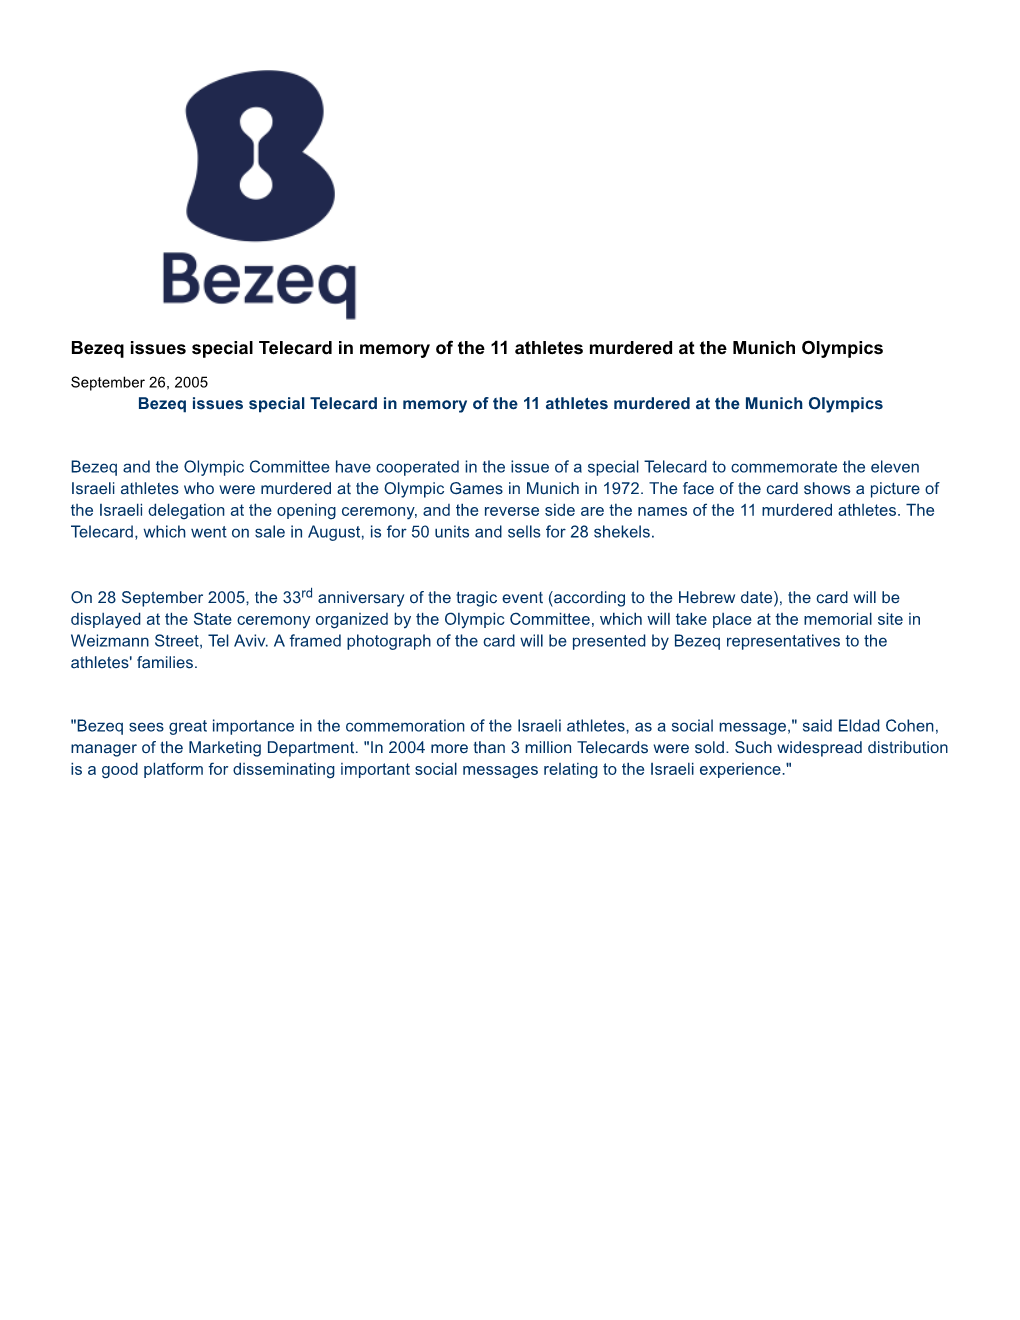 Bezeq Issues Special Telecard in Memory of the 11 Athletes Murdered at the Munich Olympics